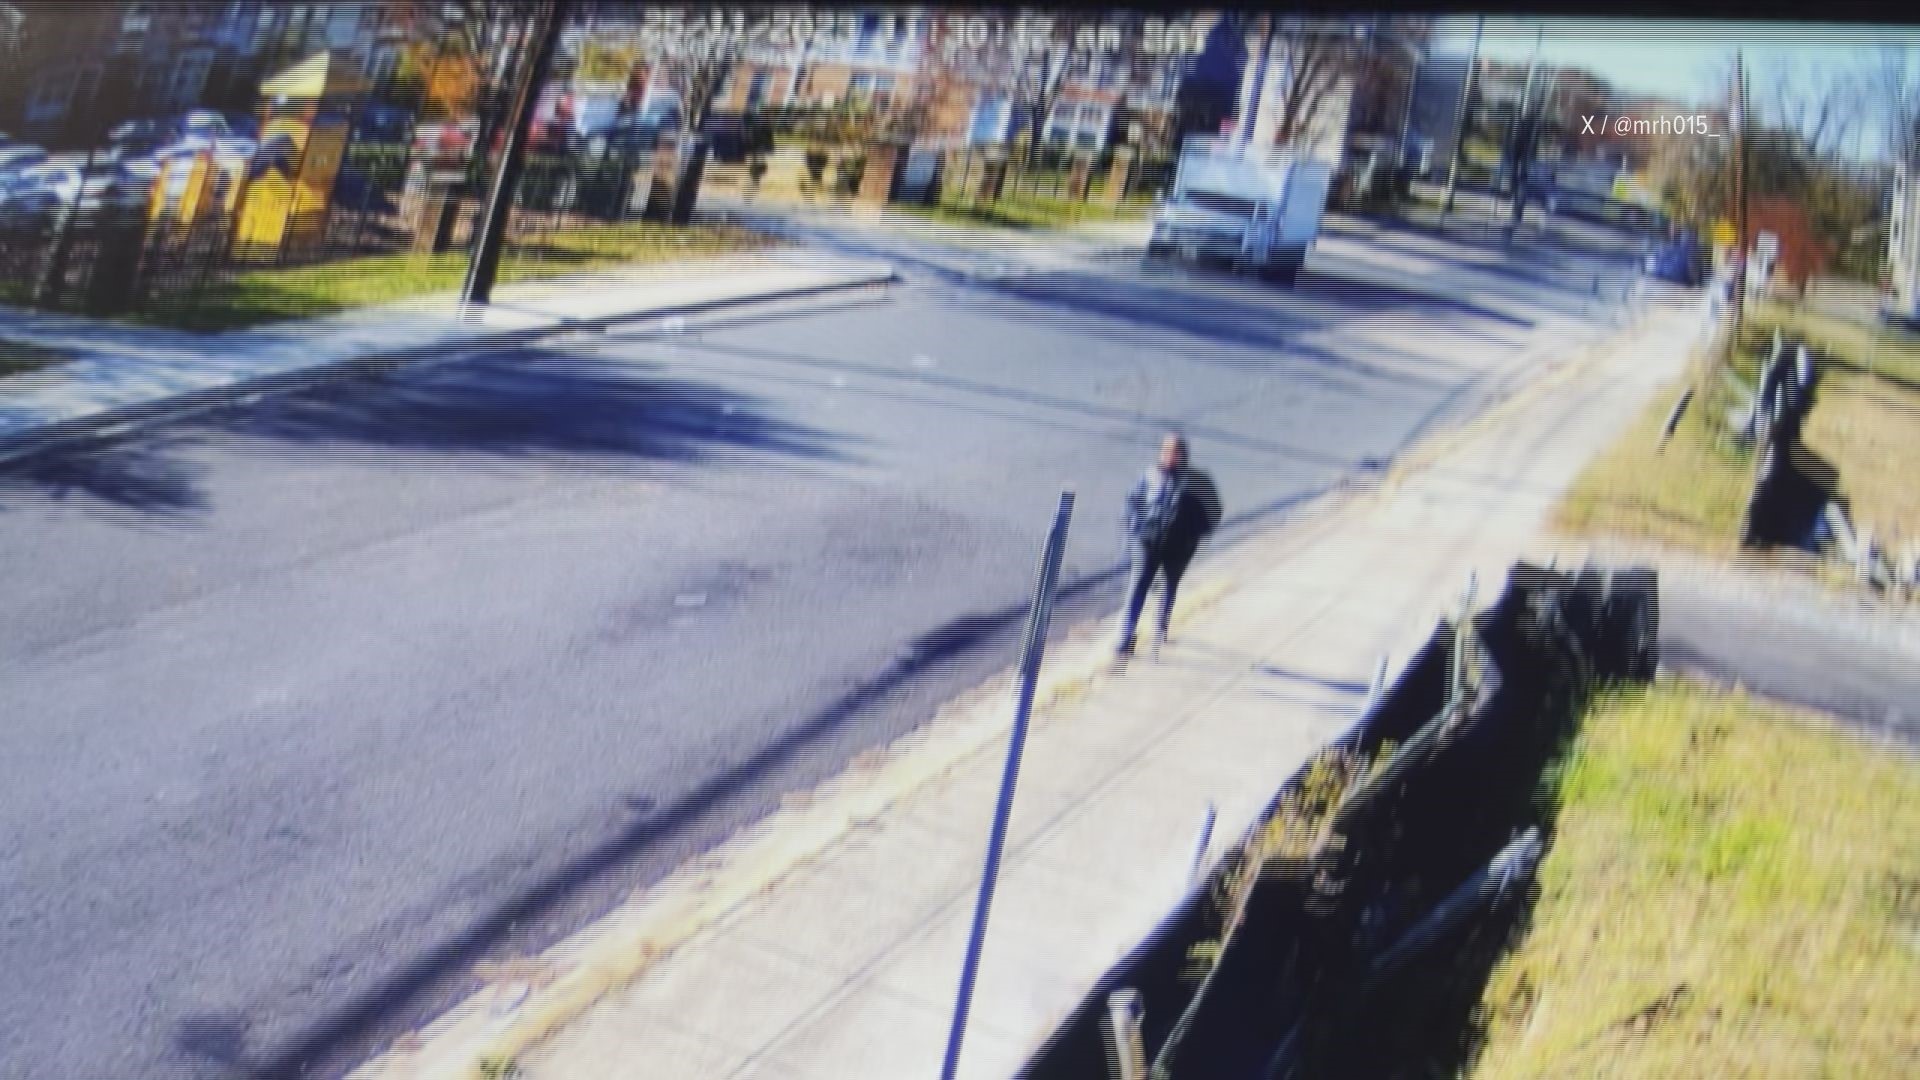 A neighbor on Elvans Road in Southeast shared this scary surveillance video with WUSA9